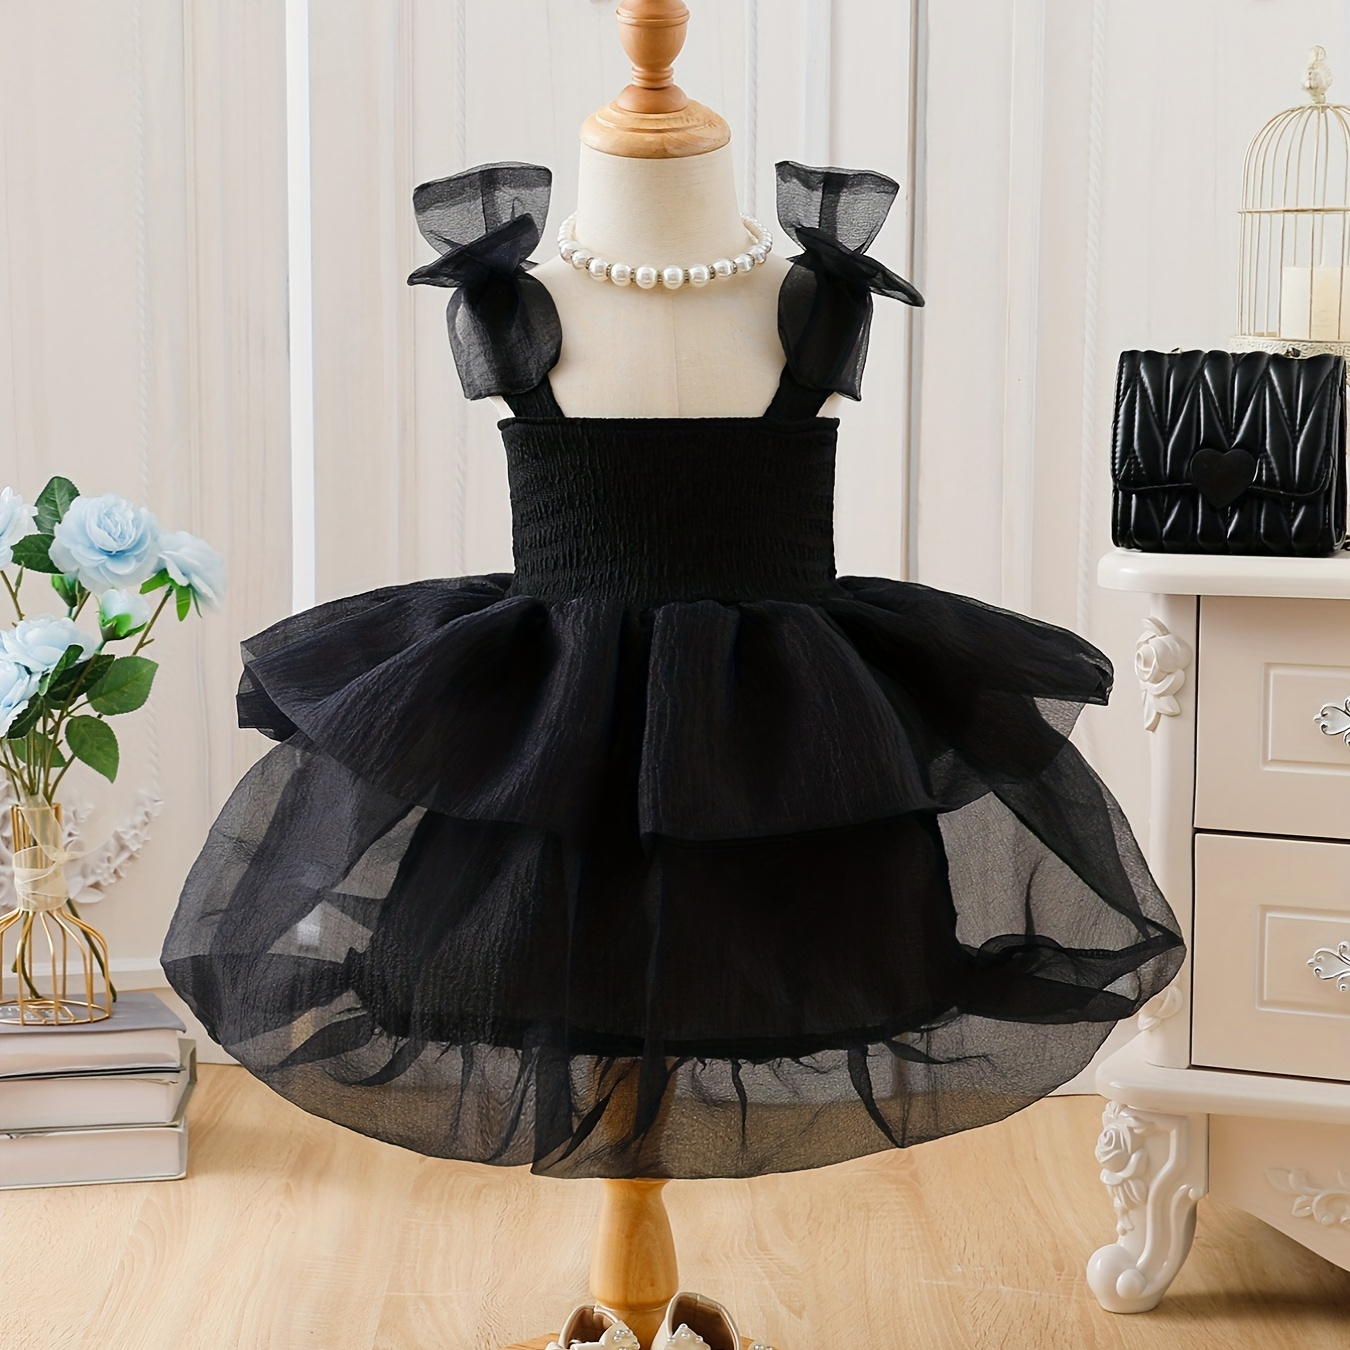 

Girls' Princess Birthday Dress With Mesh Tulle Stitching Grace Strappy Tutu Dress For Party Outfit